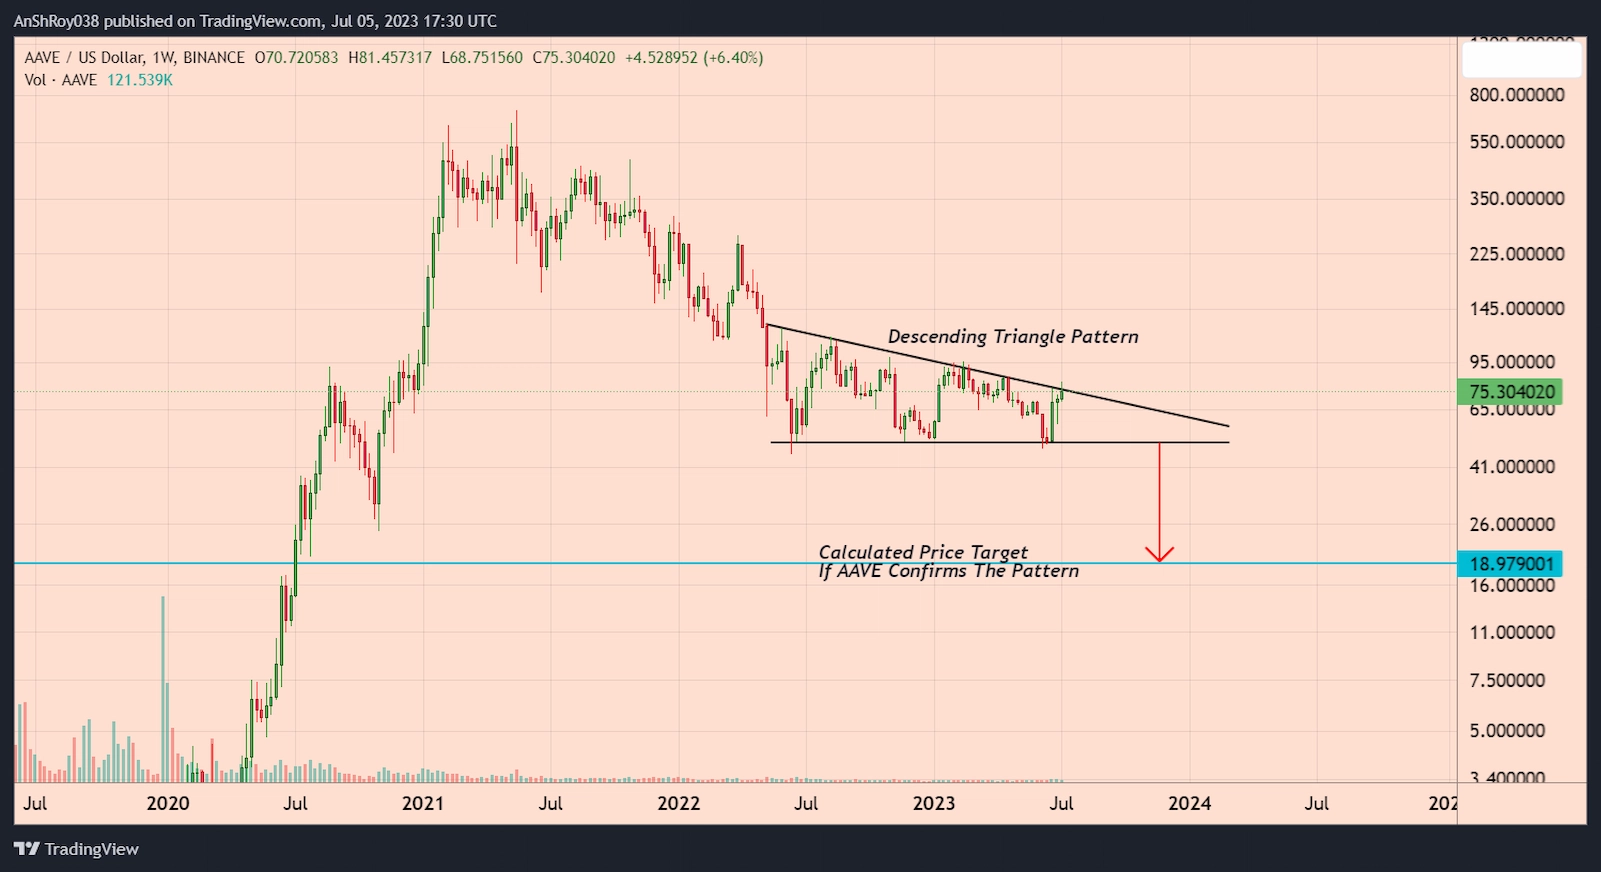 AAVE price has formed a bearish pattern with a -75% price target. Source: Tradingview.com